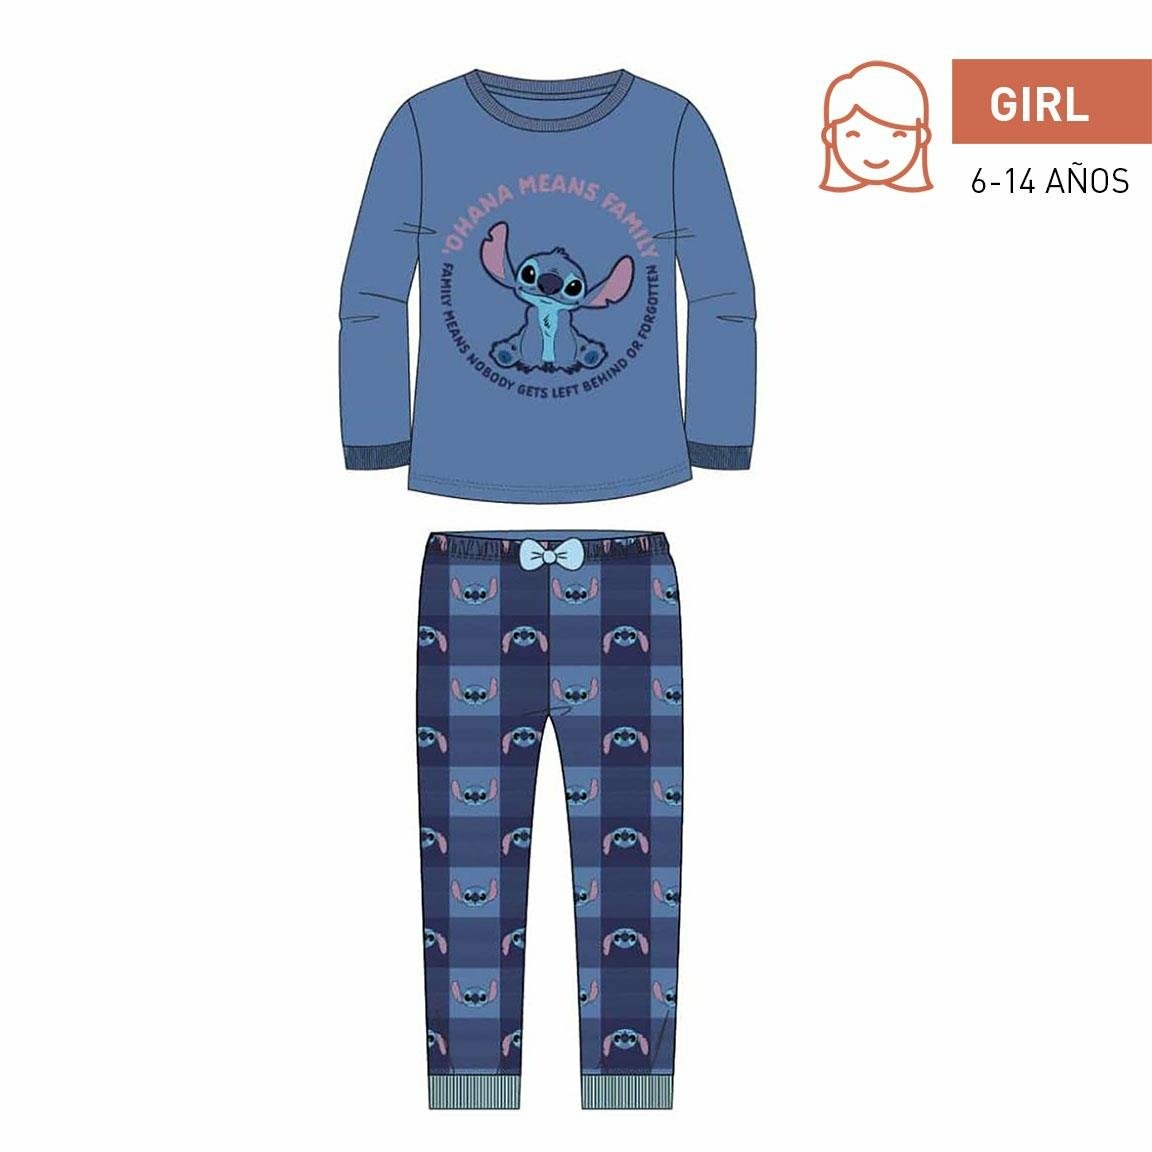 https://www.reference-gaming.com/assets/media/product/150864/lilo-stitch-pyjama-fille-en-jersey-14-ans.jpg?format=product-cover-large&k=1638578195